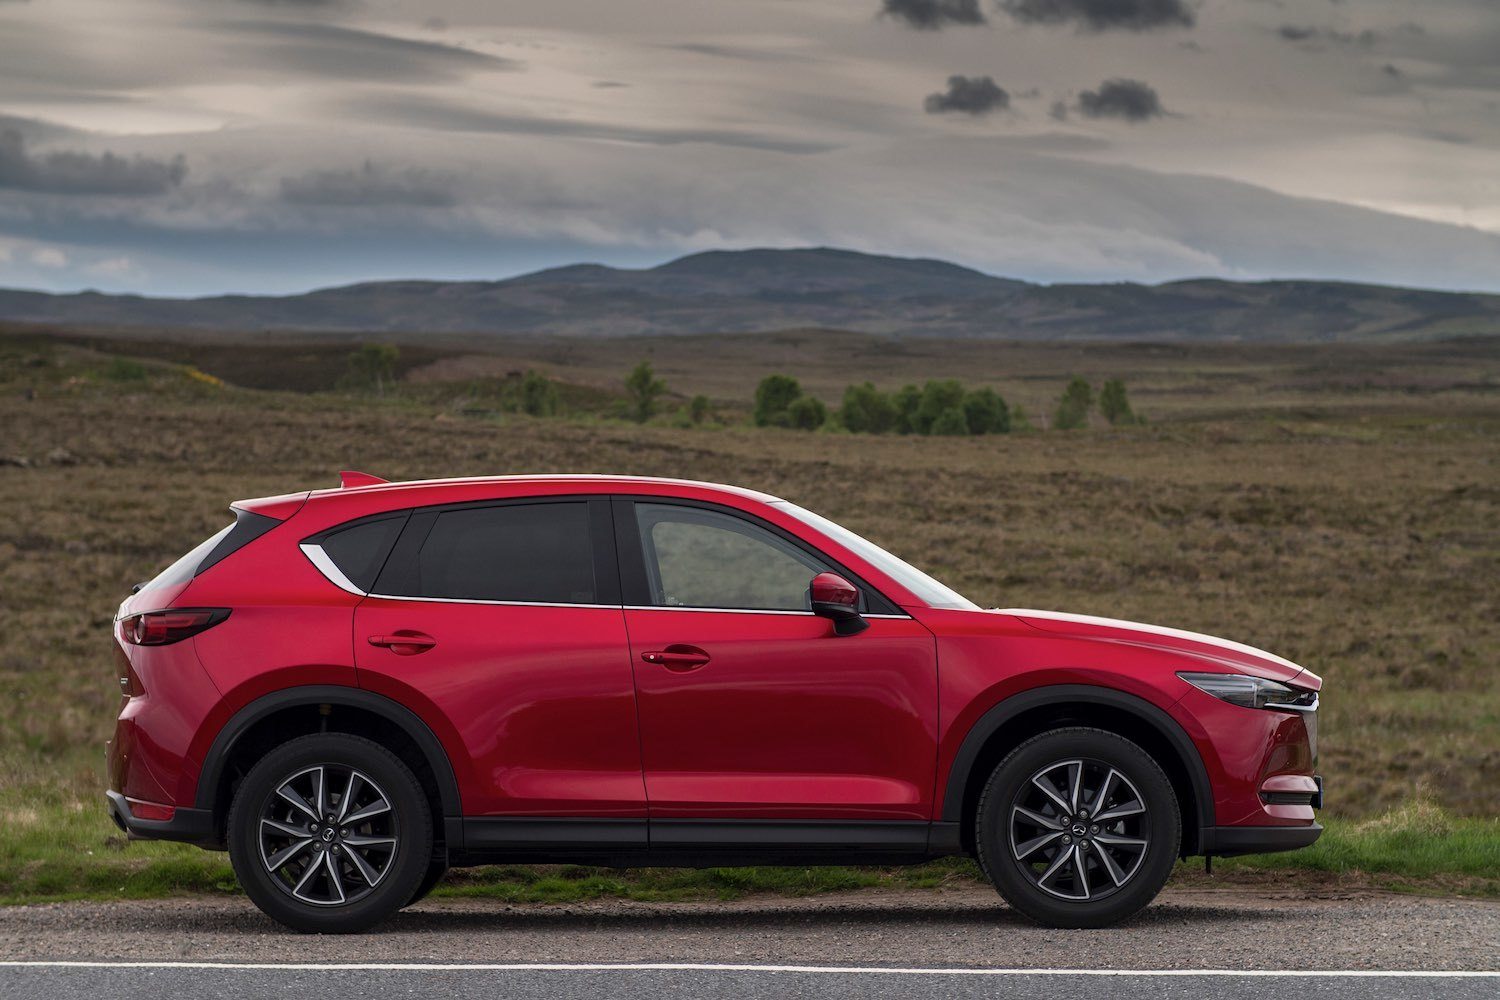 Tom Scanlan reviews the all new Mazda CX-5 in the Cairngorms Scotland for drive 3